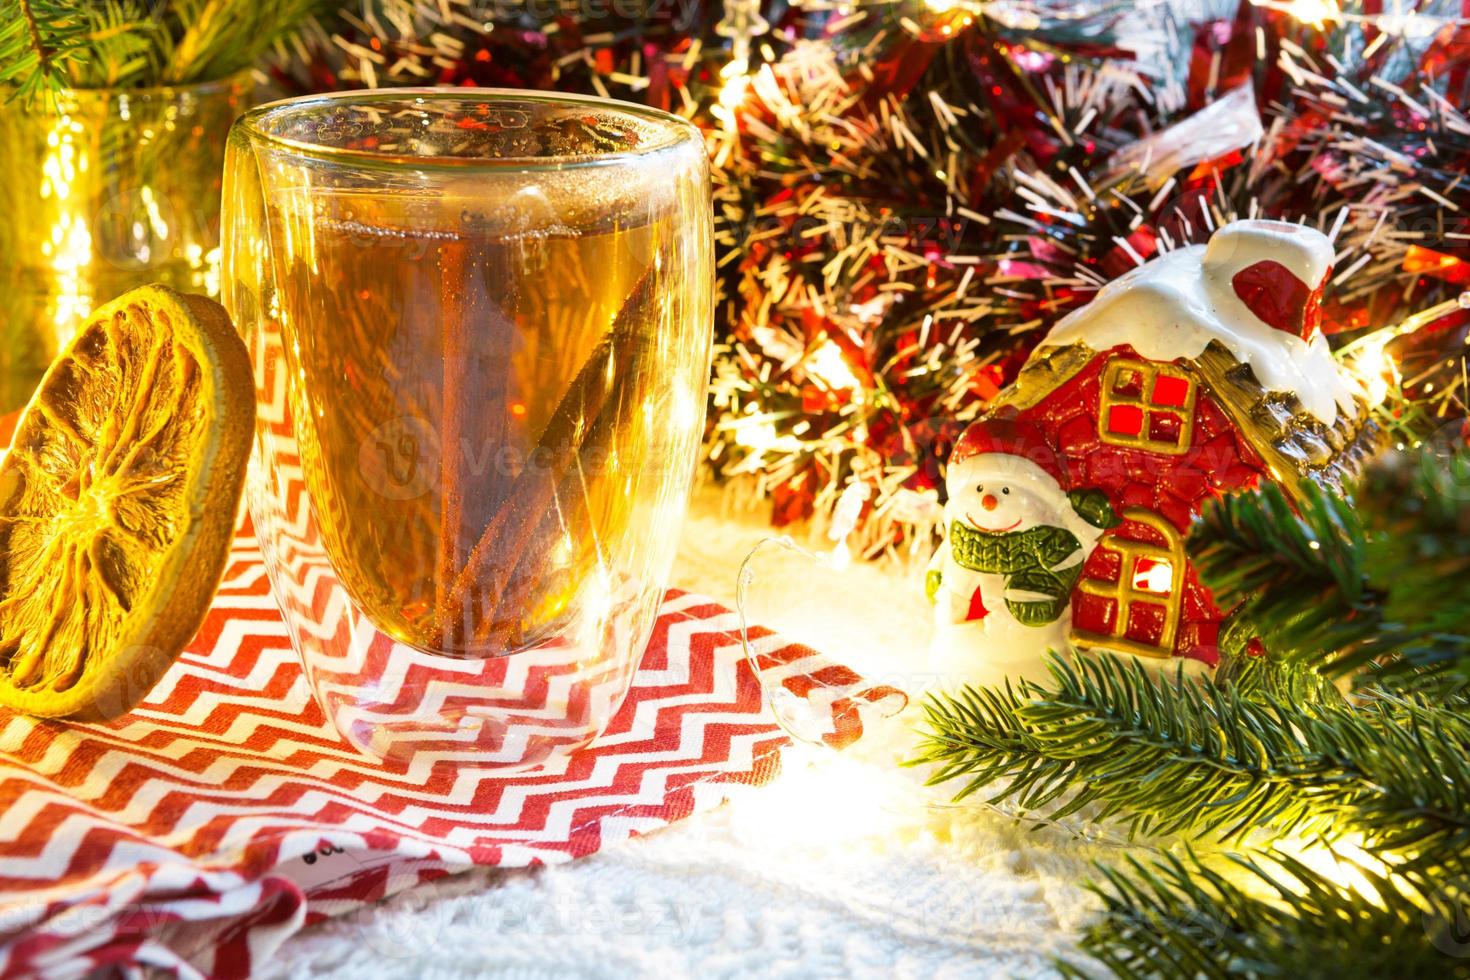 Transparent double-walled glass tumbler with hot tea and cinnamon sticks on the table with Christmas decor and small house. New year's atmosphere, slice of dried orange, garland, spruce branch, cozy photo